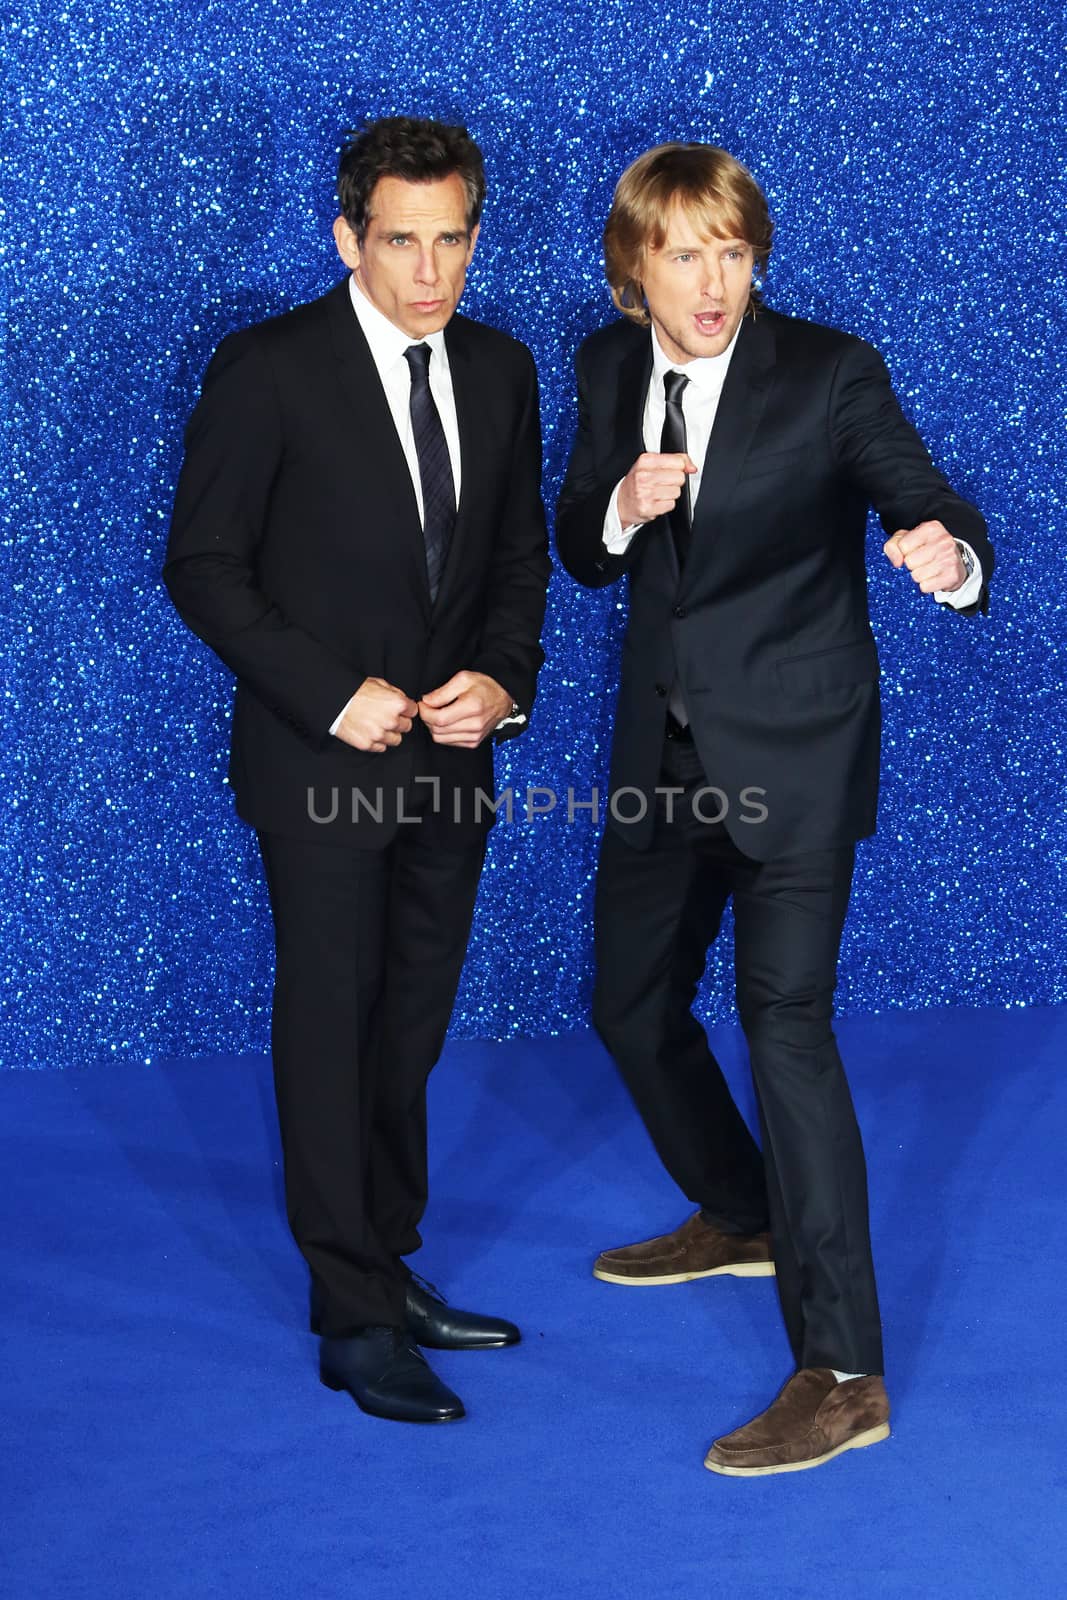 UK, London: Ben Stiller and Owen Wilson pose on the blue carpet at Leicester Square in London on February 4, 2016 before a fashionable screening of Zoolander No. 2, the long-awaited sequel to Stiller's trademark hit.